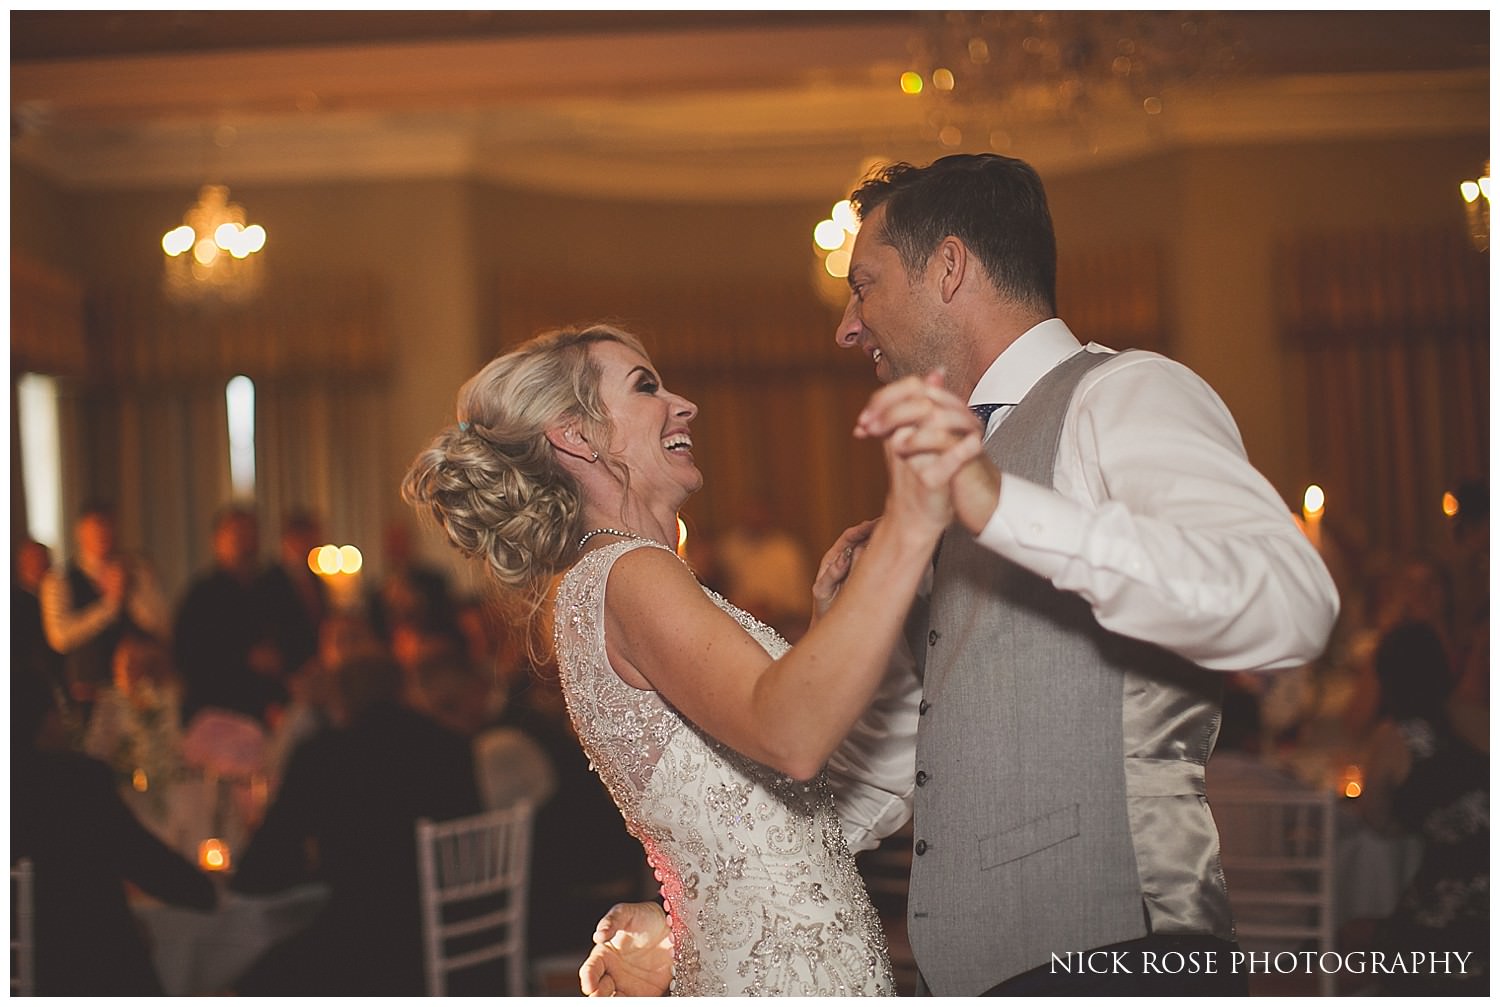  Bride and groom first dance at the Rudding Park Hotel wedding in Harrogate 